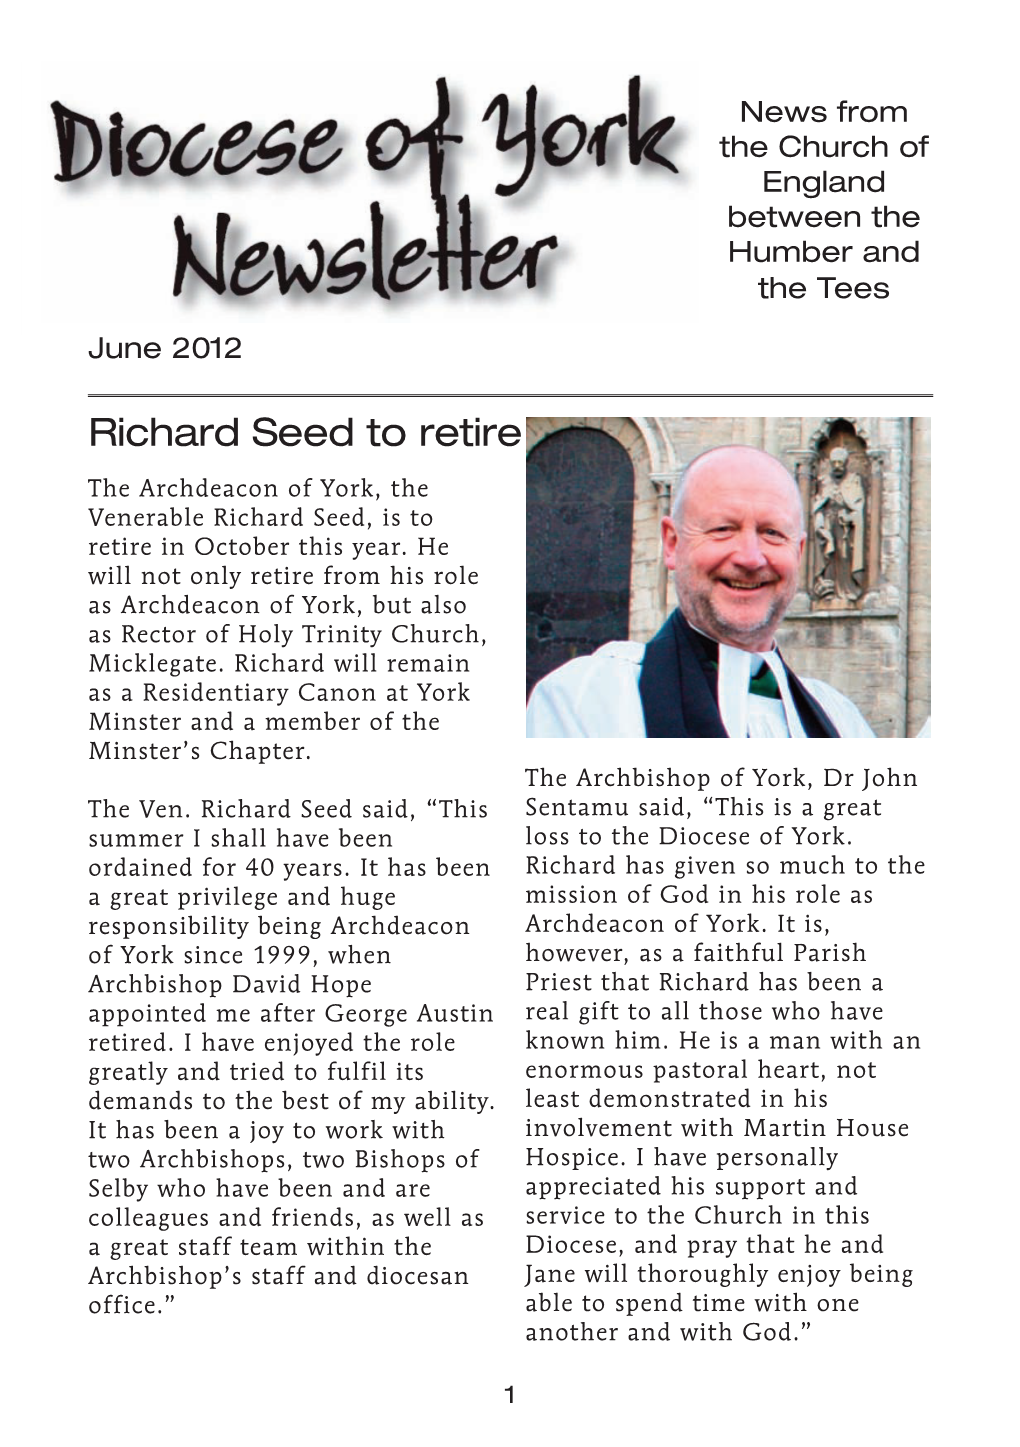 Richard Seed to Retire the Archdeacon of York, the Venerable Richard Seed, Is to Retire in October This Year